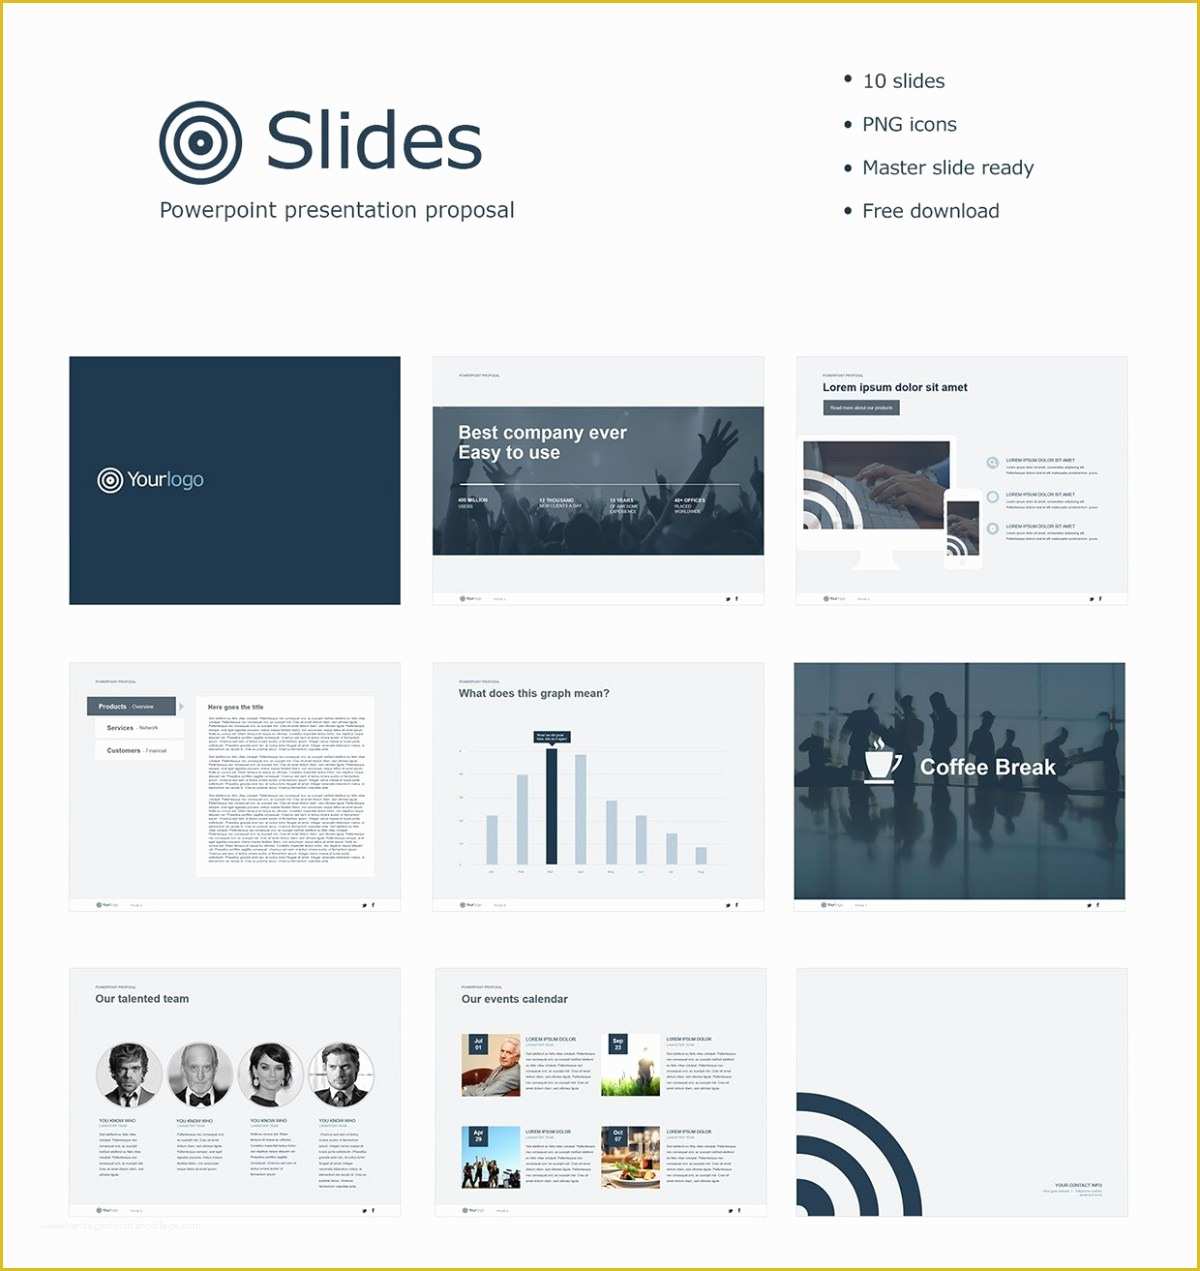 Free Powerpoint Slide Templates Of the Best 8 Free Powerpoint Templates